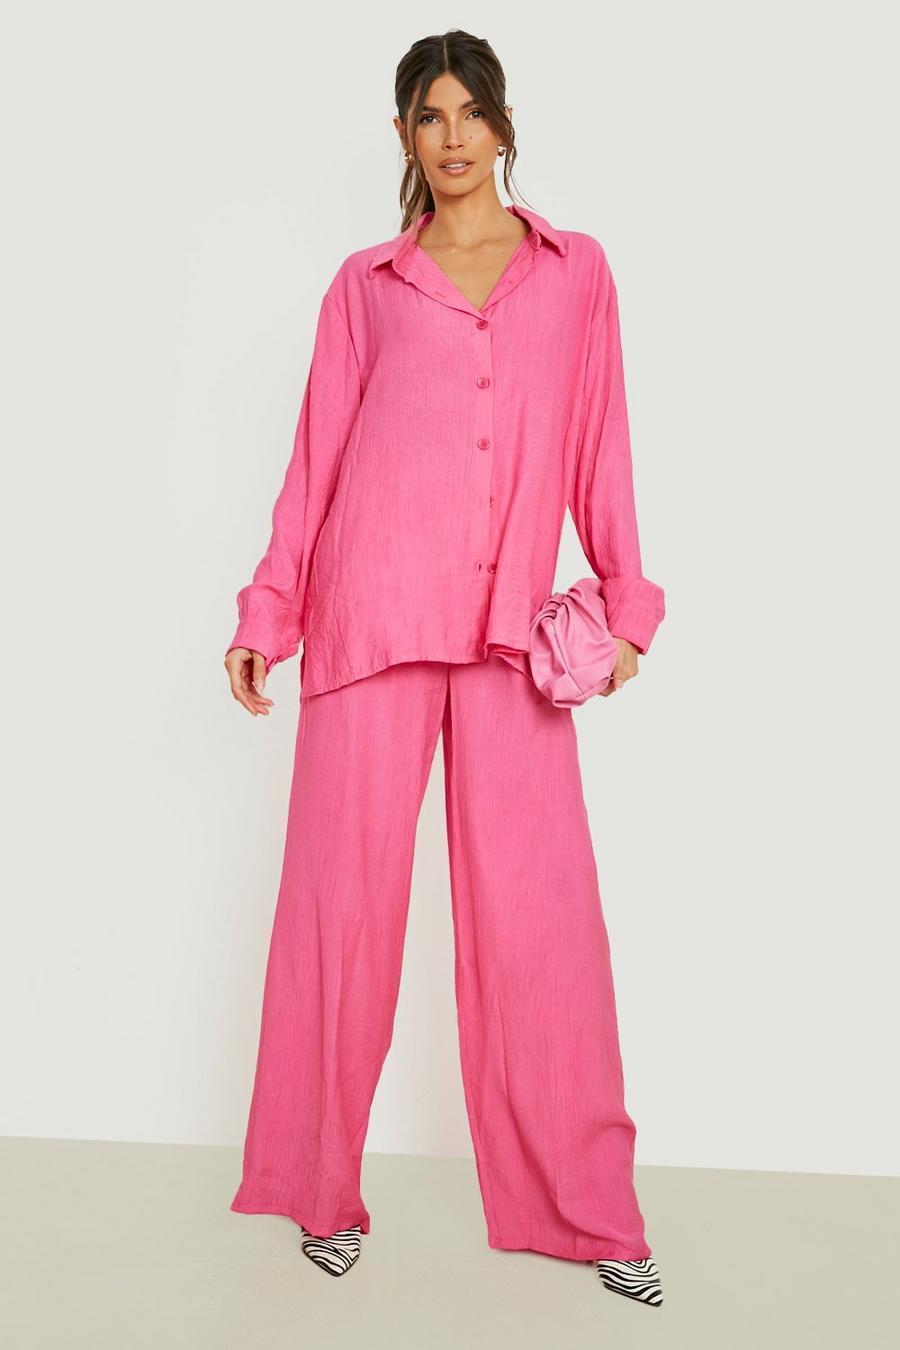 Hot pink Crinkle Relaxed Fit Linen Look Shirt